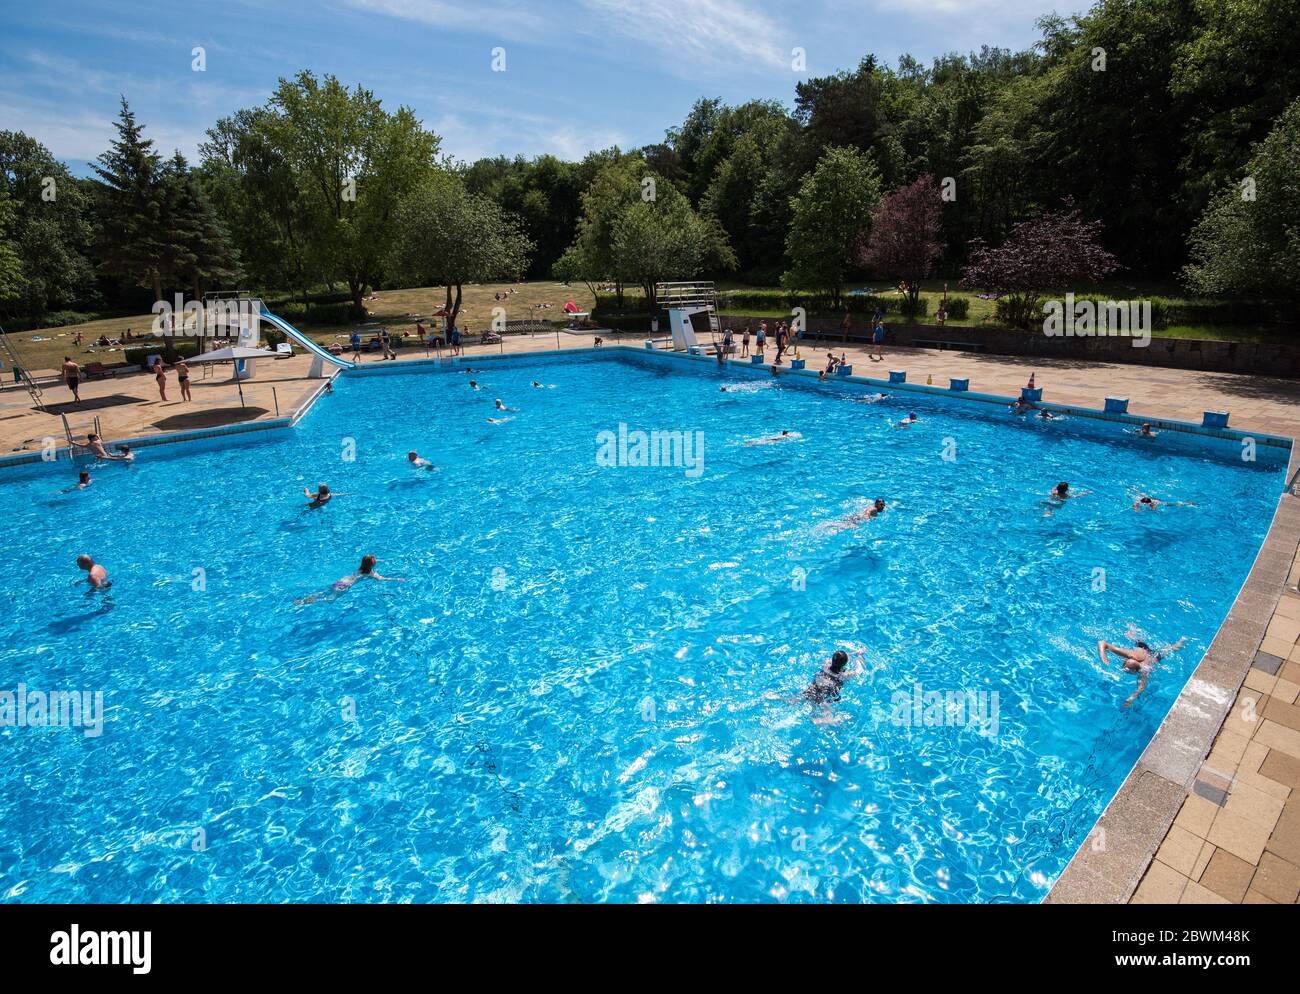 02 June 2020, Hamburg: Visitors swim in the Marienhöhe outdoor pool. With  bright sunshine and temperatures around 26 degrees Celsius, Hamburg's  open-air swimming pools were well attended on their first day of